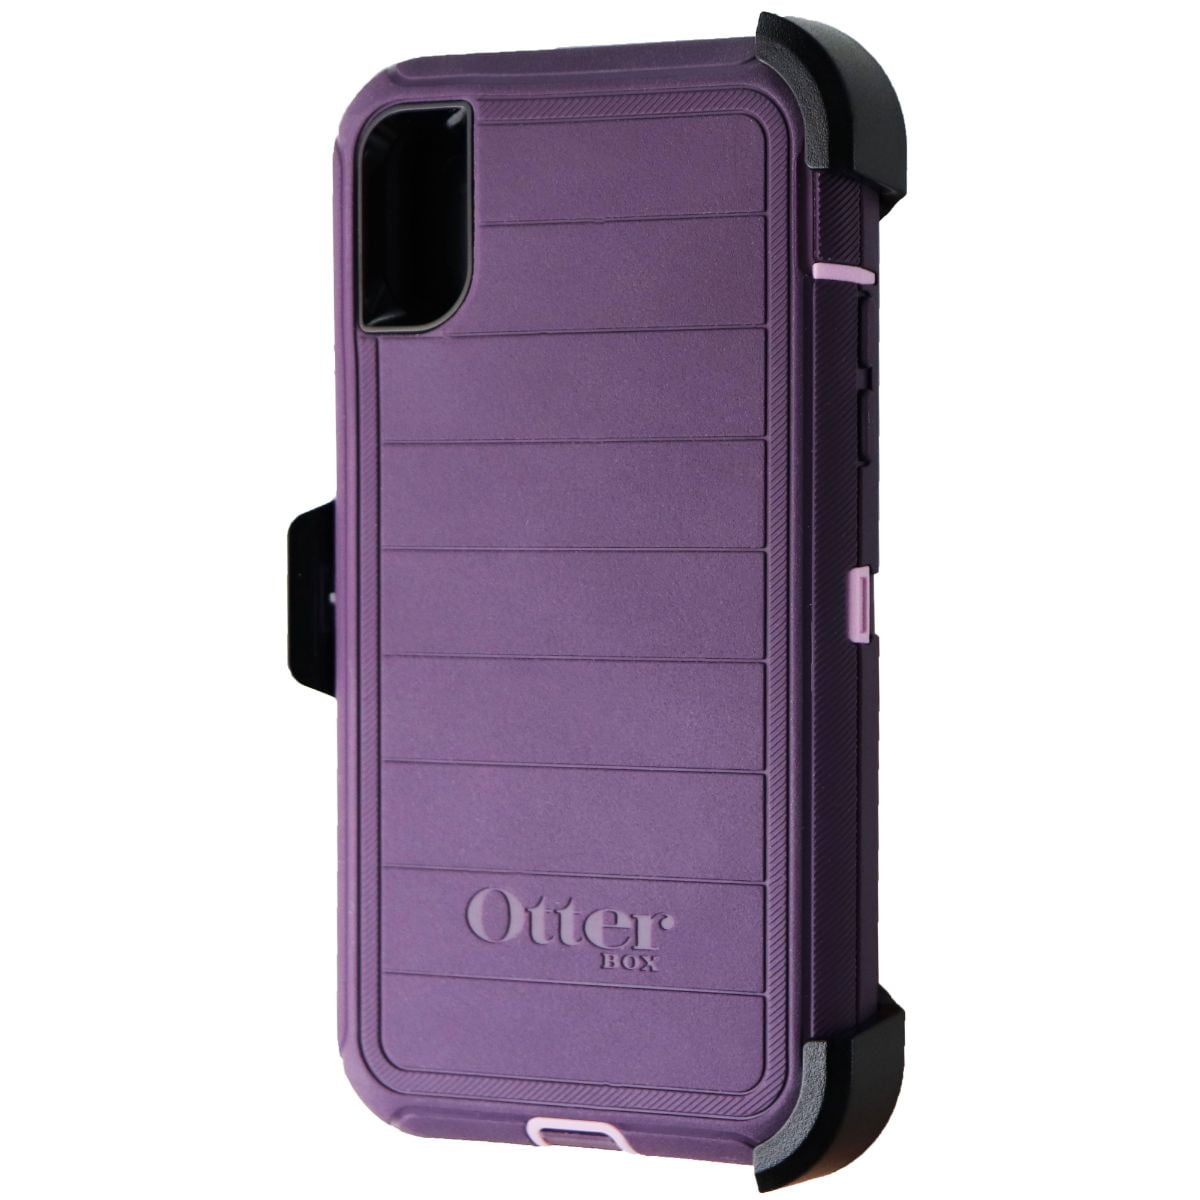 OtterBox Defender Pro Series Screenless Case for iPhone Xs / X - Purple